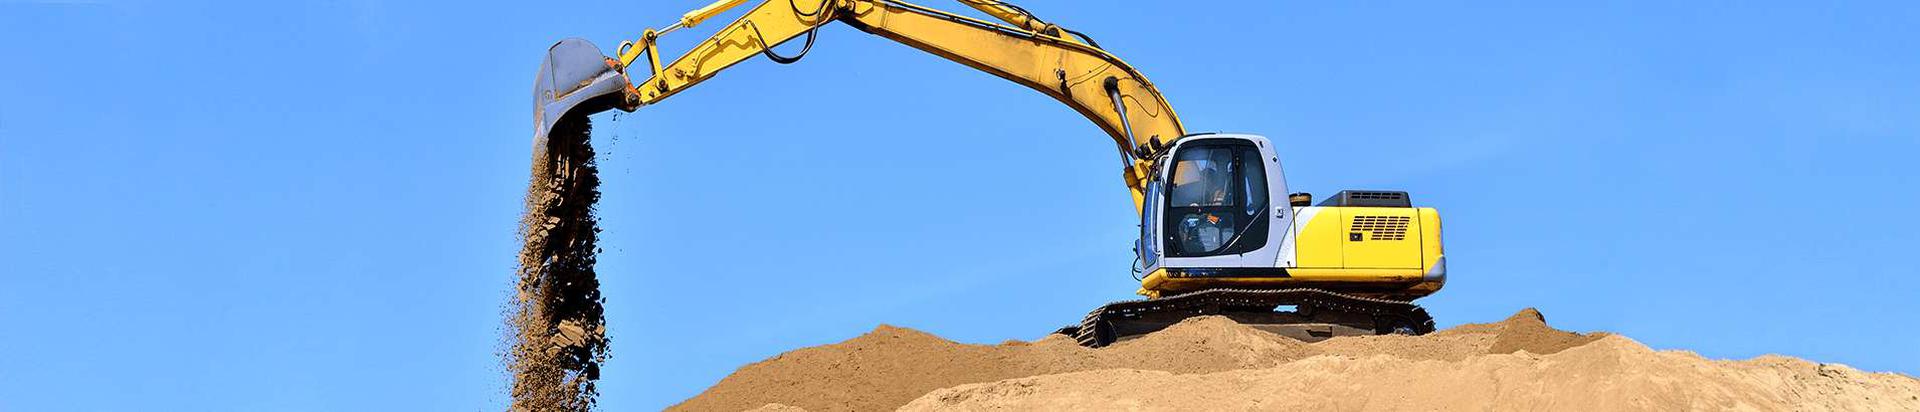 construction machinery and tools, Construction machinery and tools, rental of construction machinery and tools, rental and lending, construction and real estate